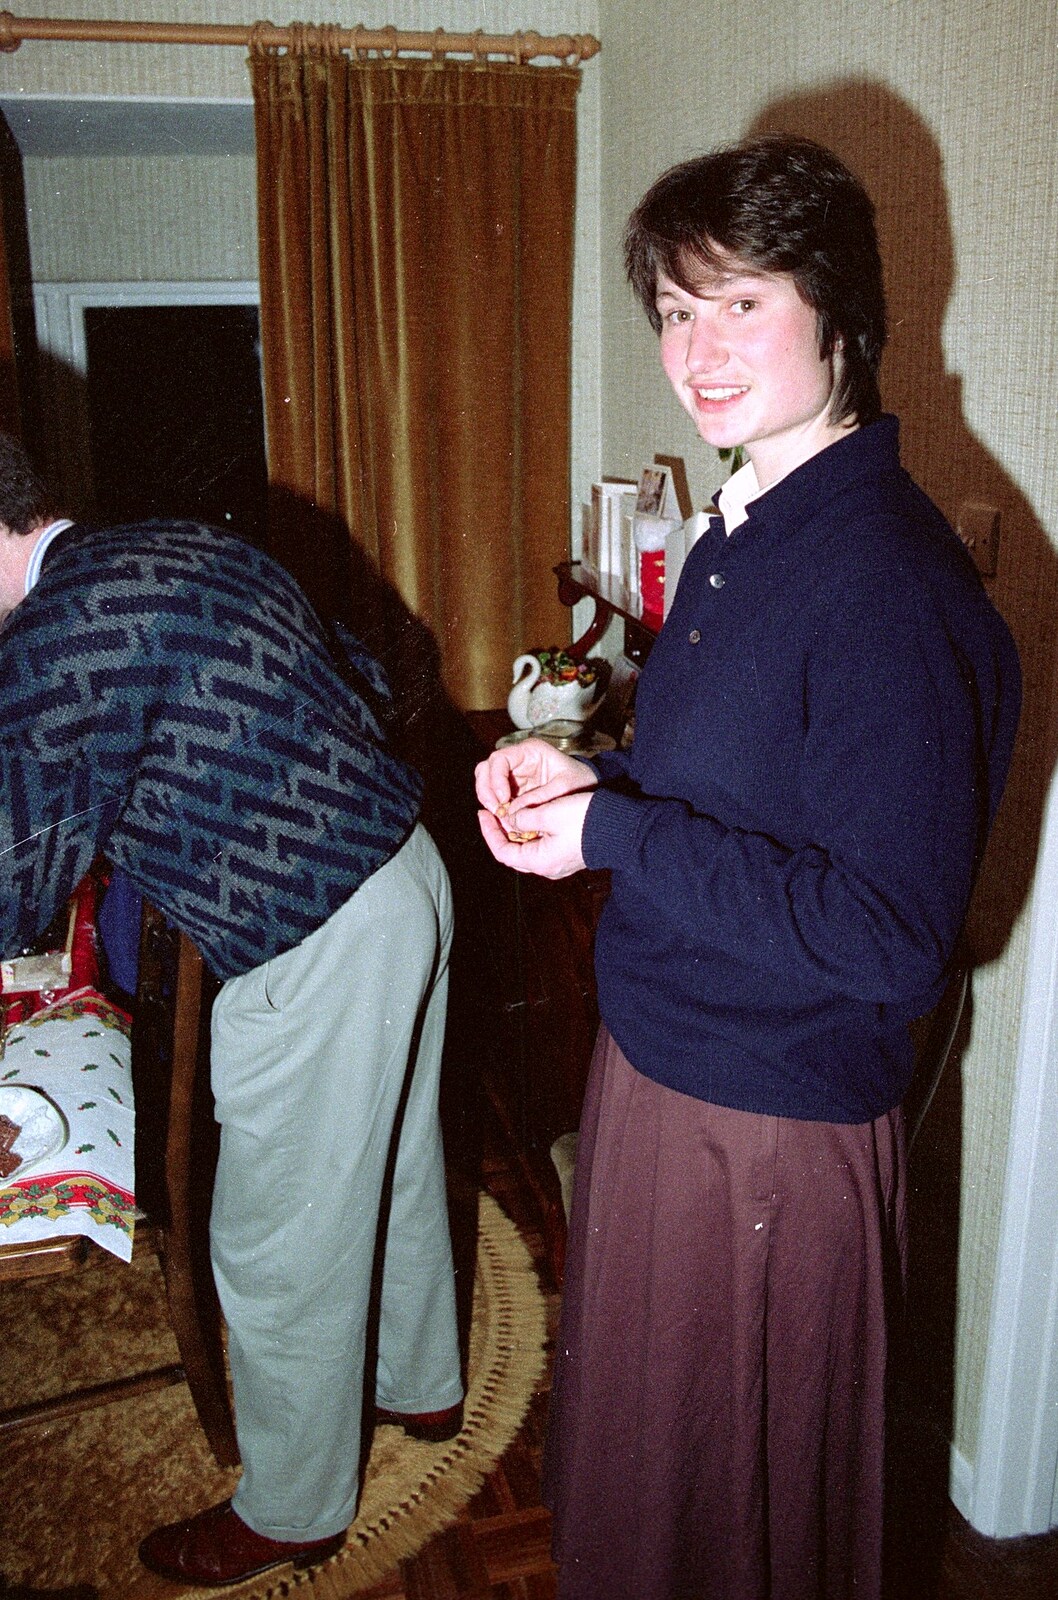 Angela's got a stash of peanuts from Uni: A Dinner Party, Harbertonford and Buckfastleigh, Devon - 24th December 1988